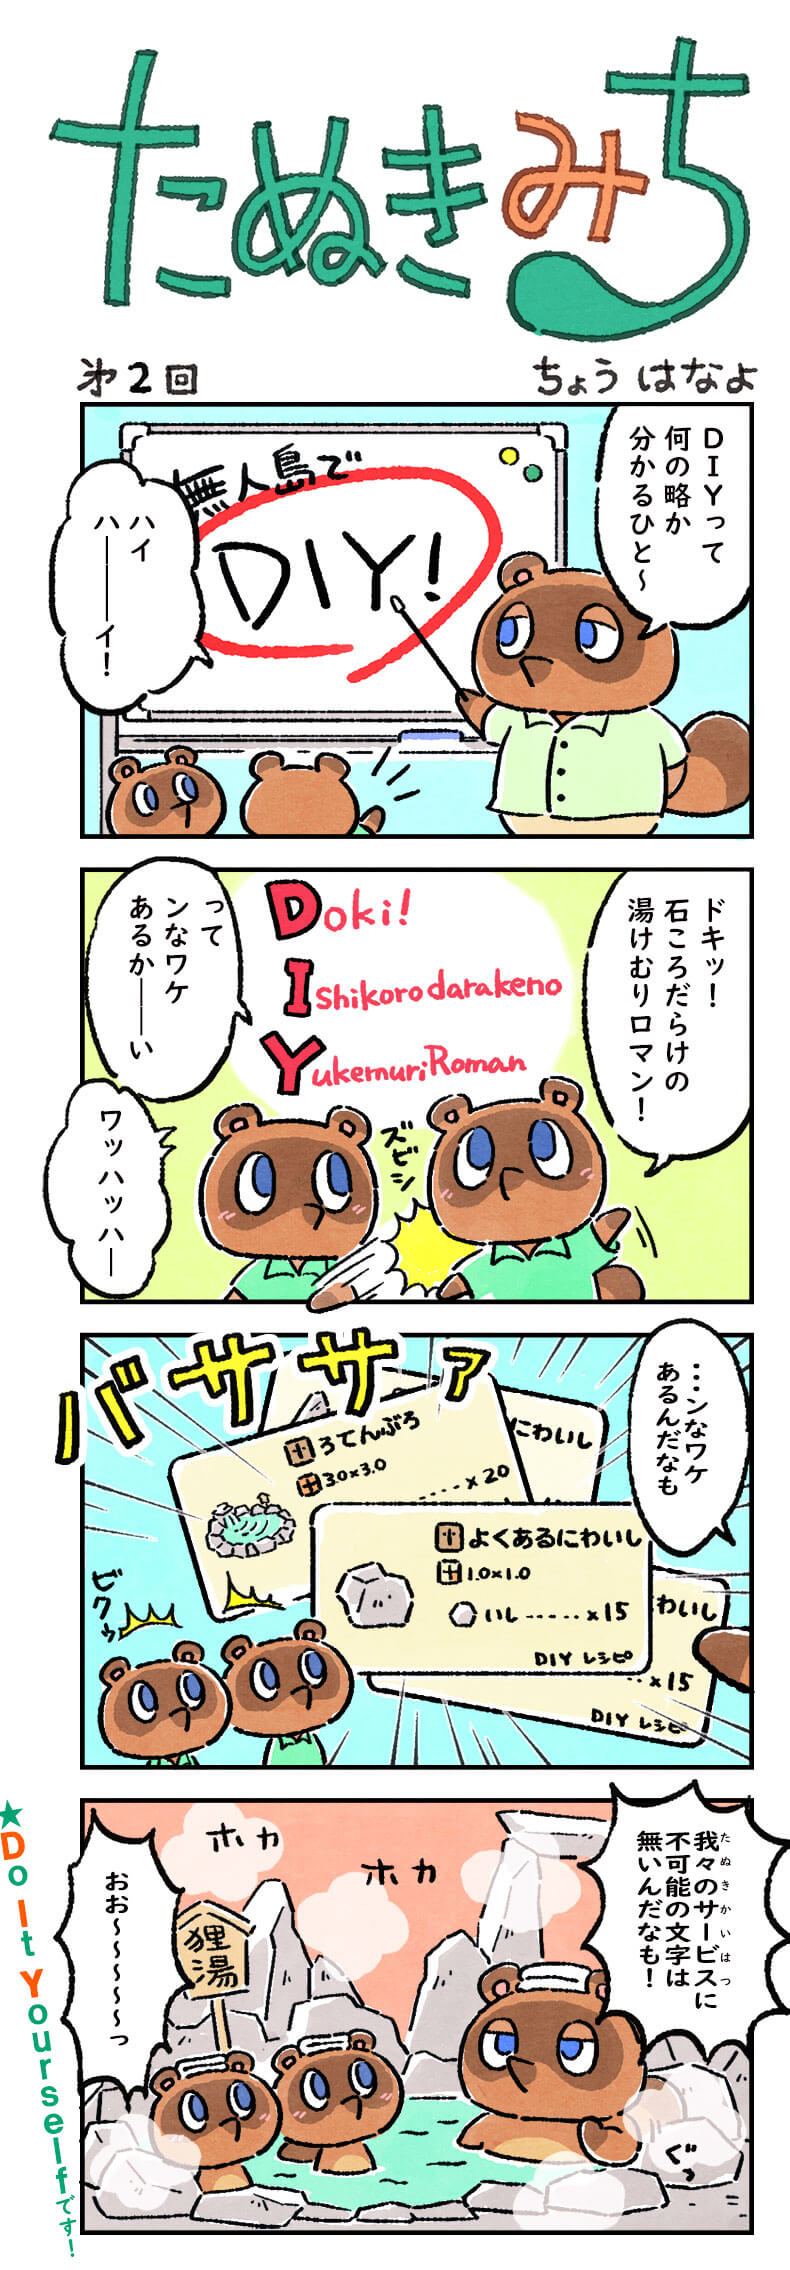 New Entry The Entire Animal Crossing New Horizons Nook Tails Comic Series With Translations Animal Crossing World